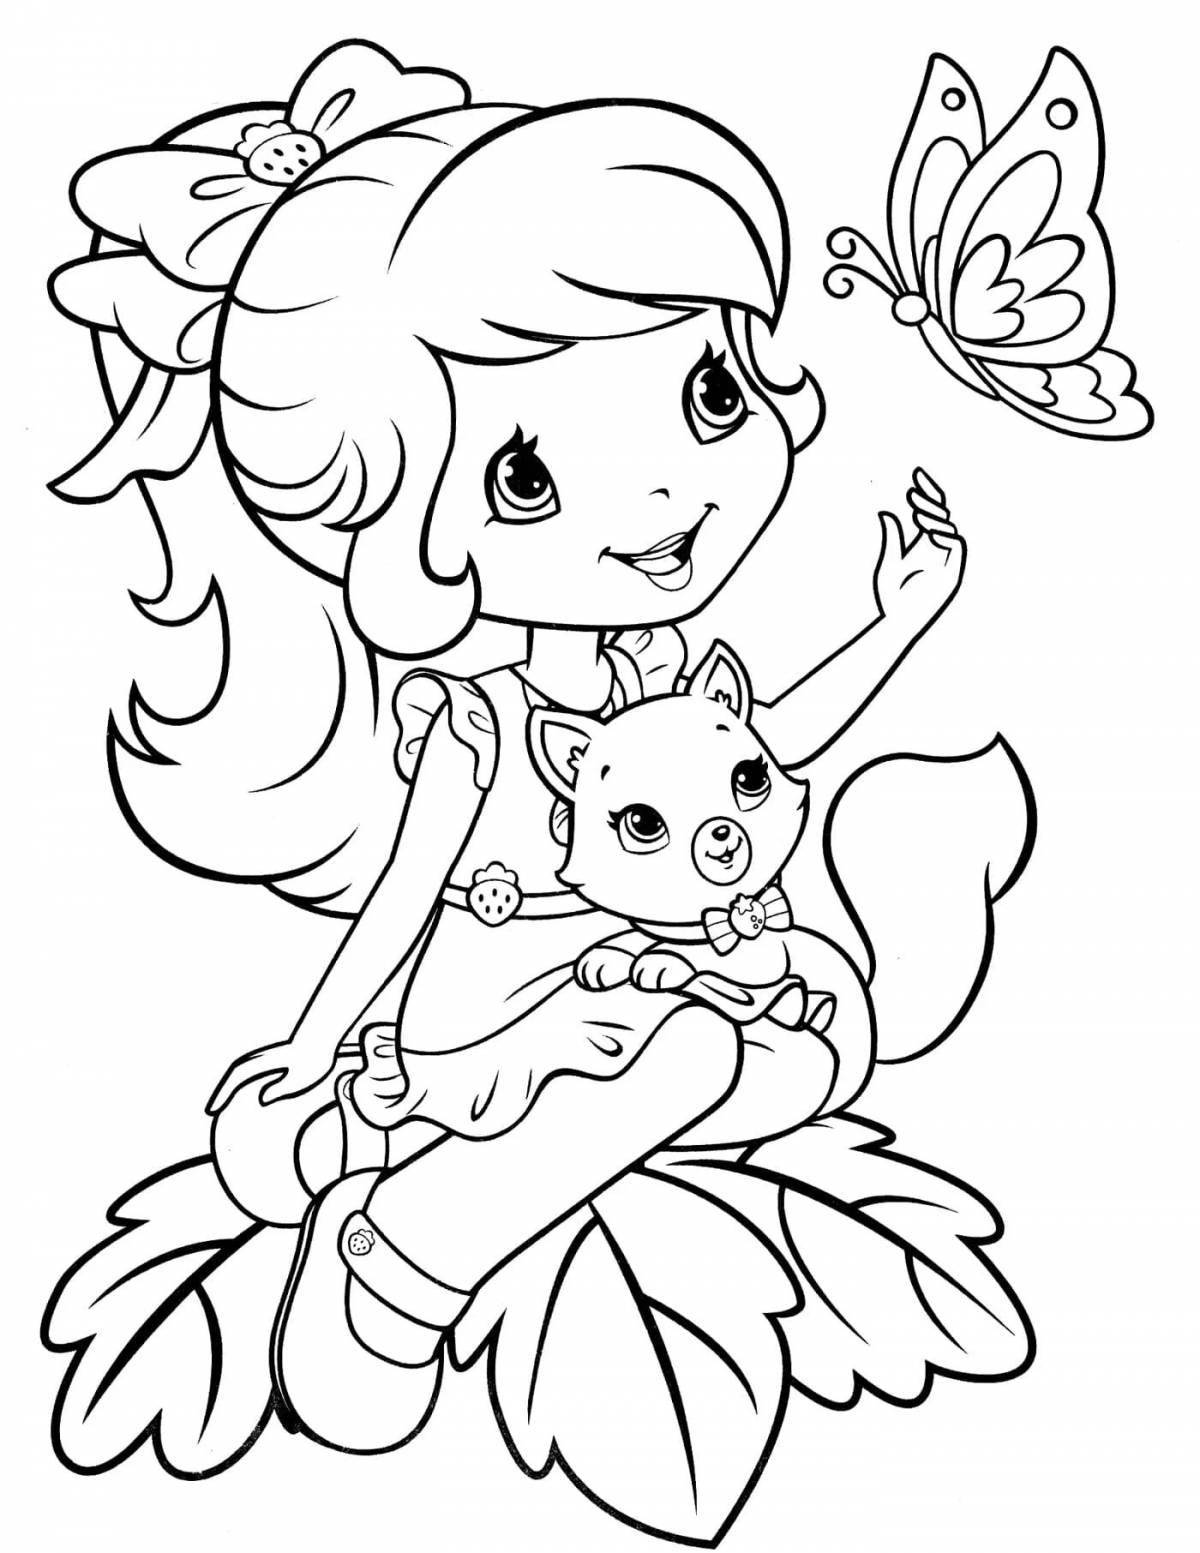 7 year crazy coloring pages